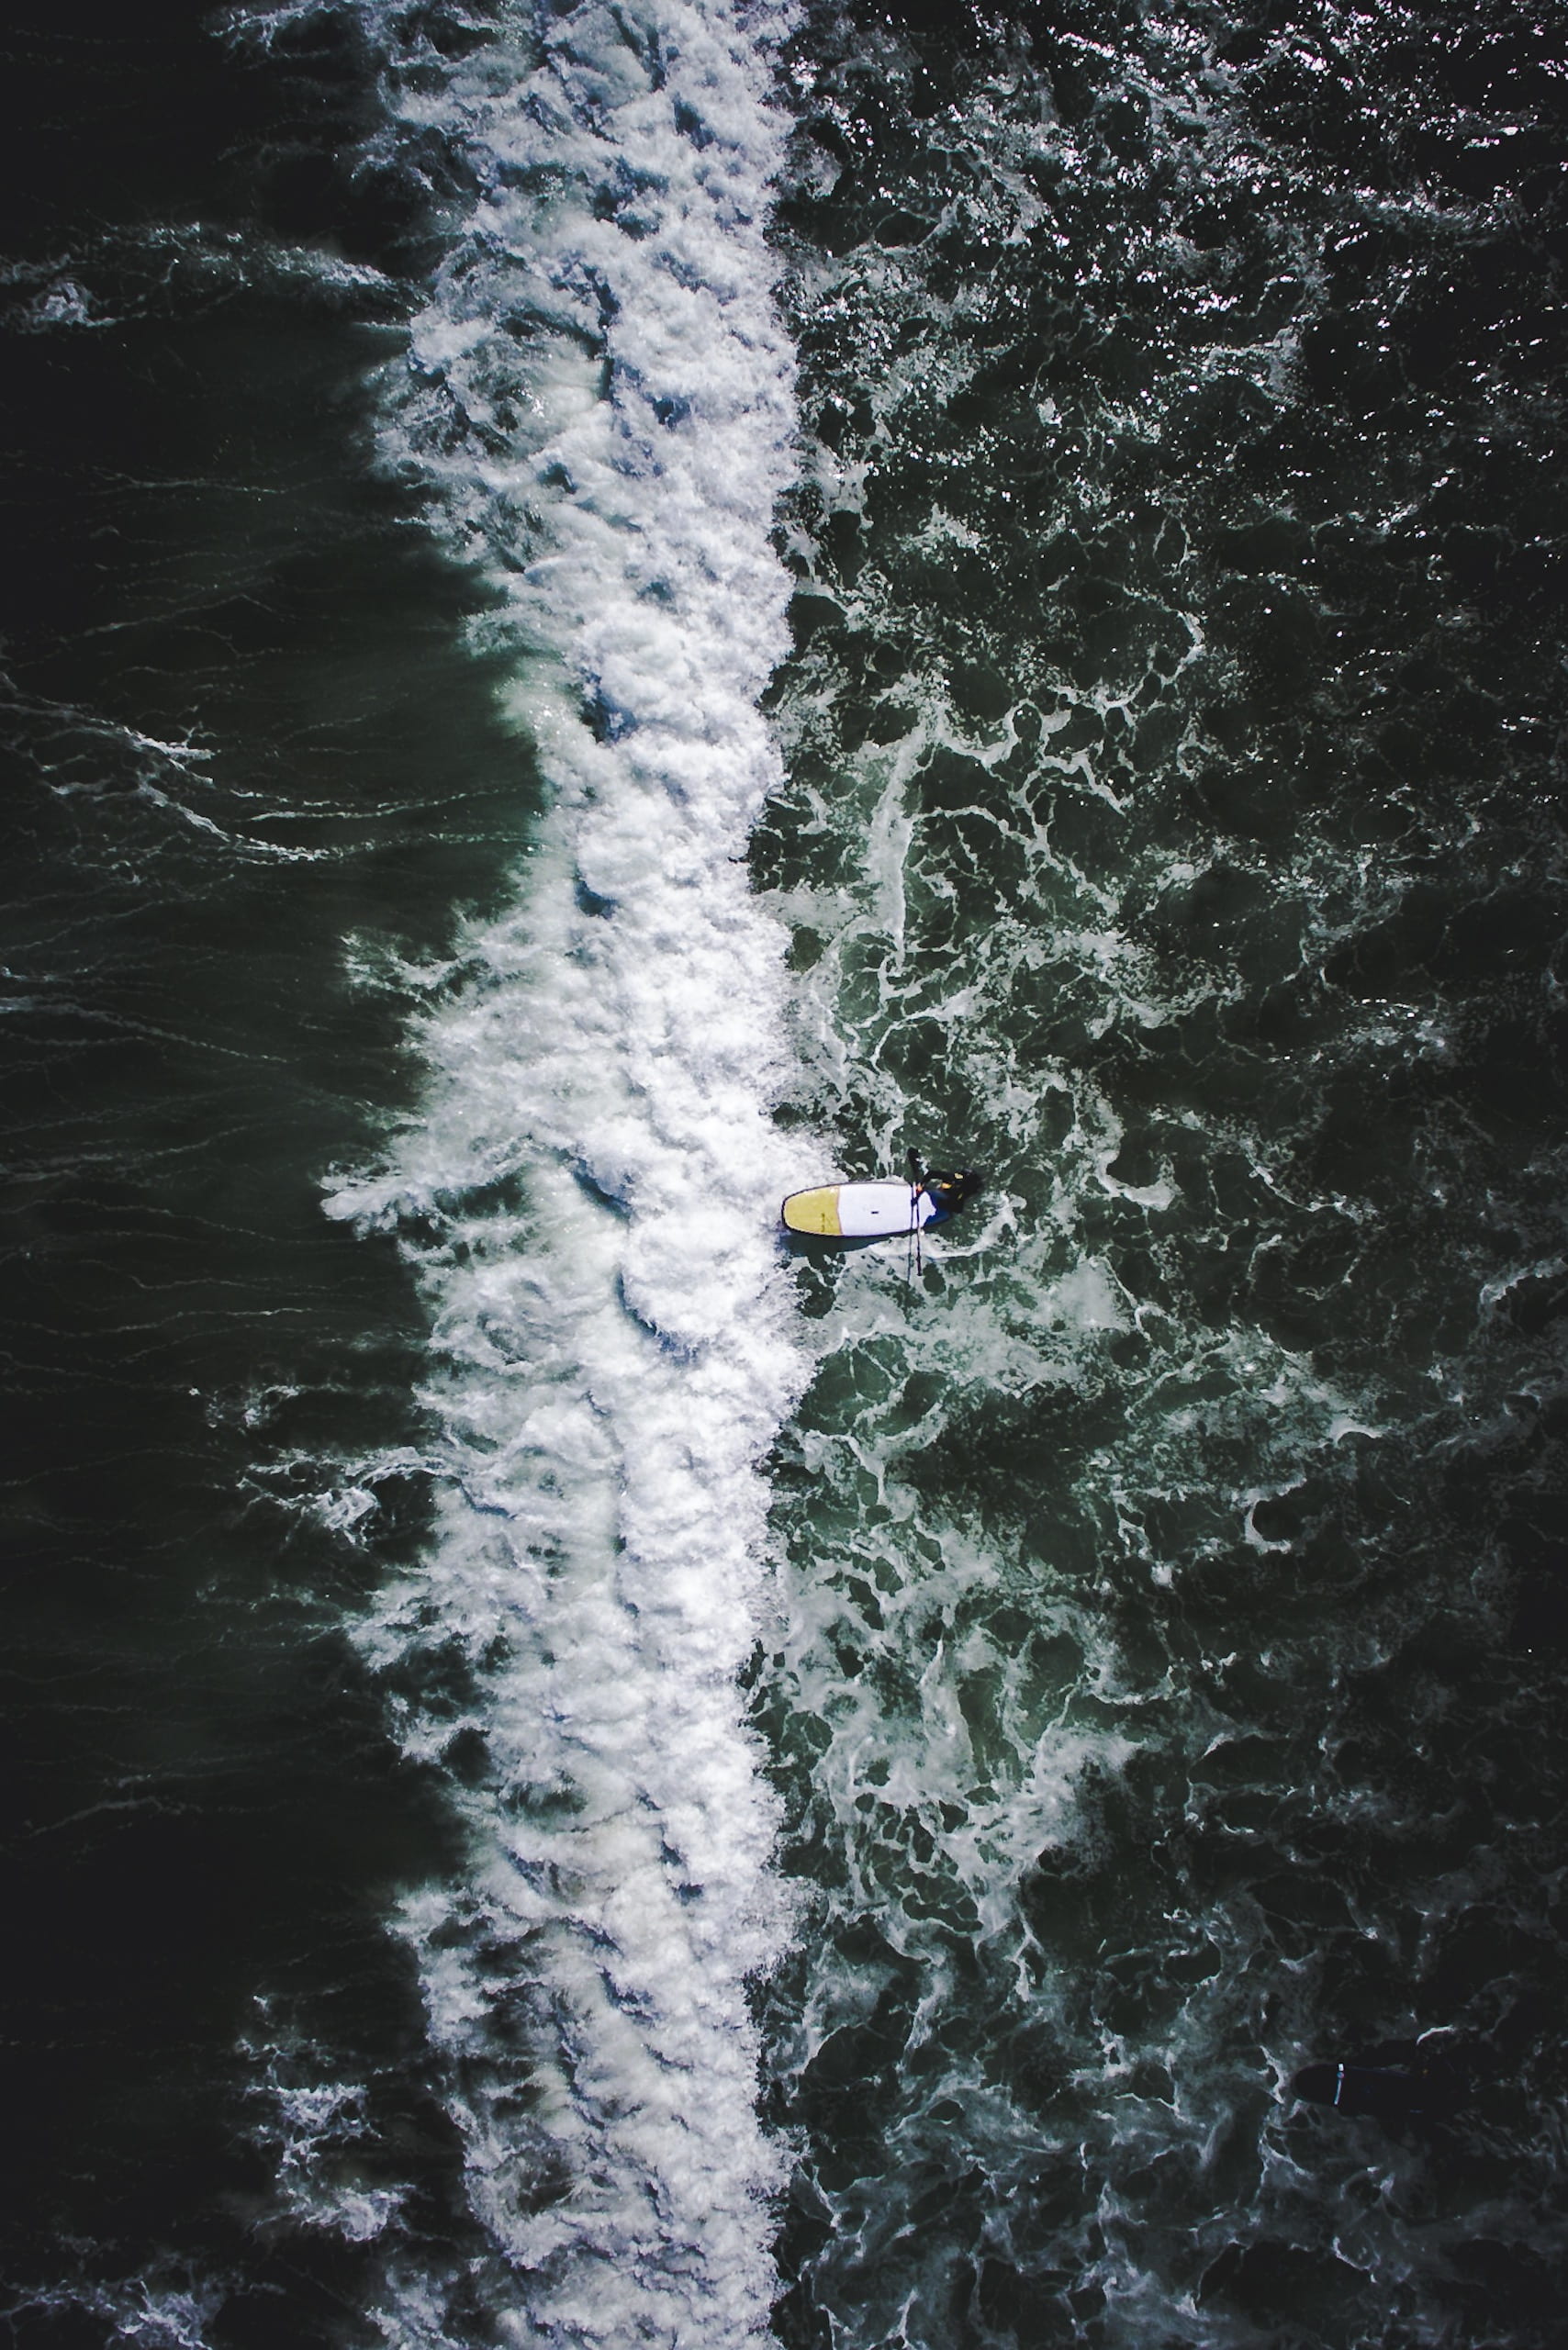 Abstract waves, person standing on surfboard near oceanwaves